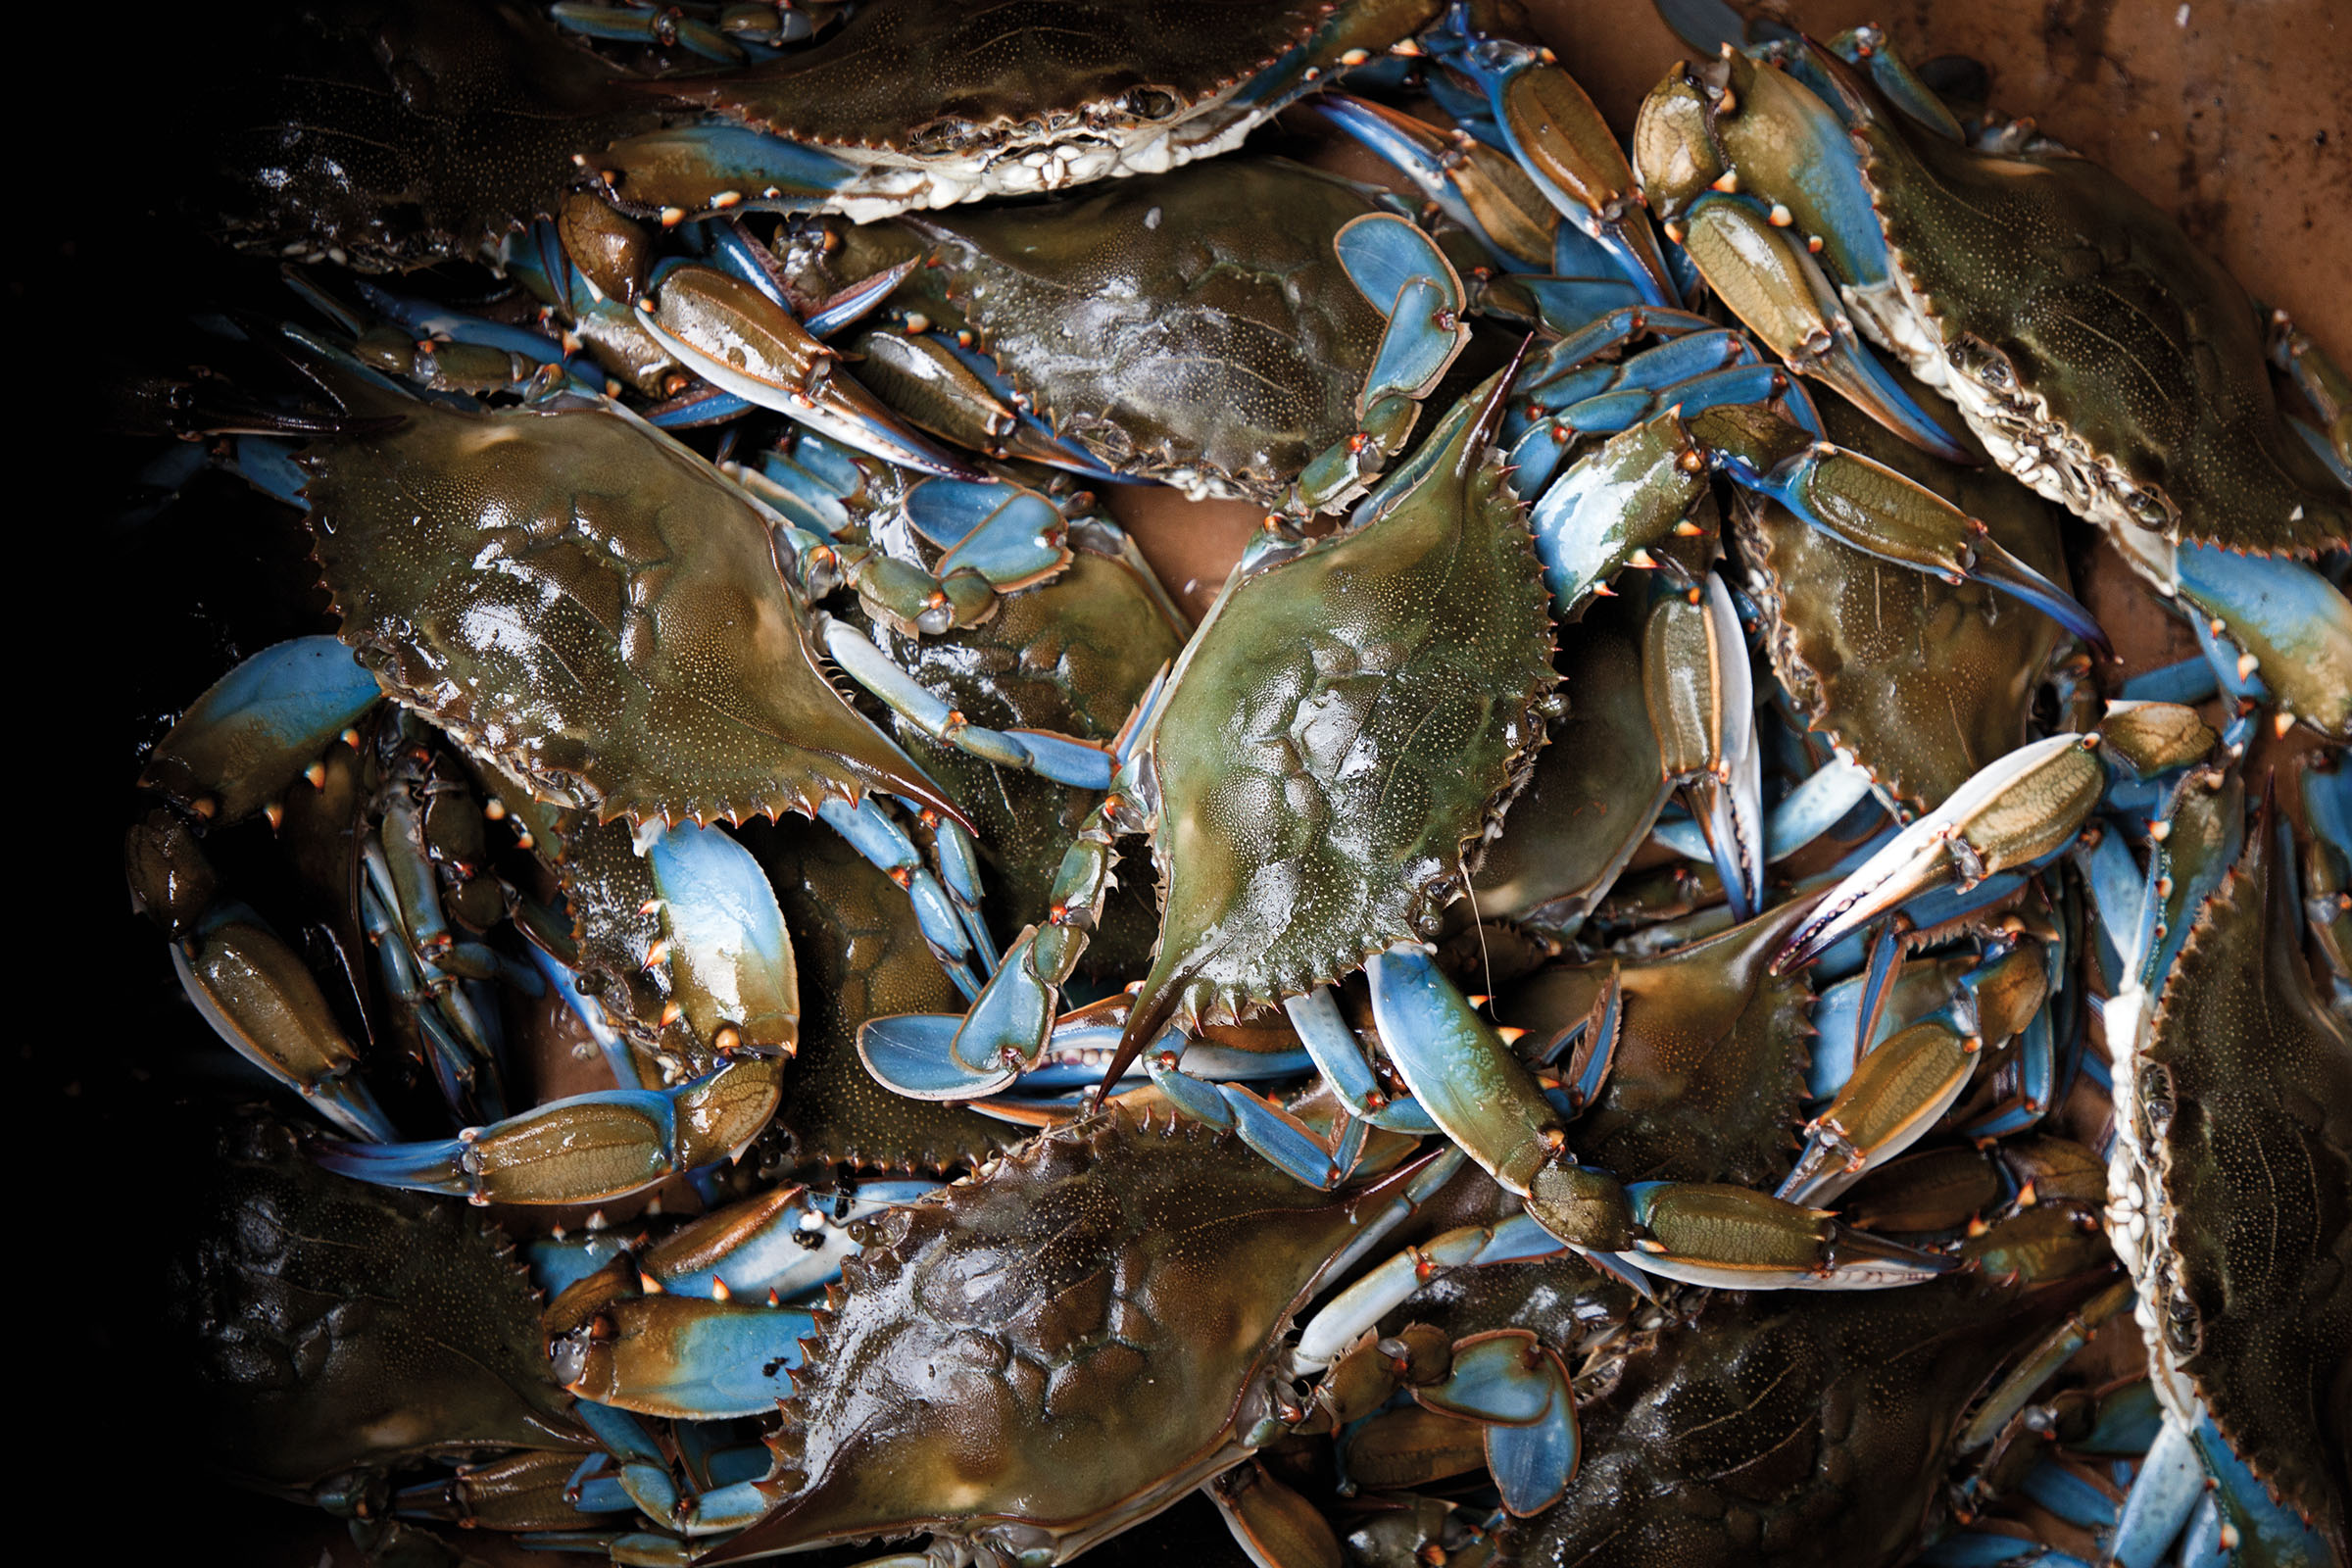 An overhead view of a pile of blue crabs